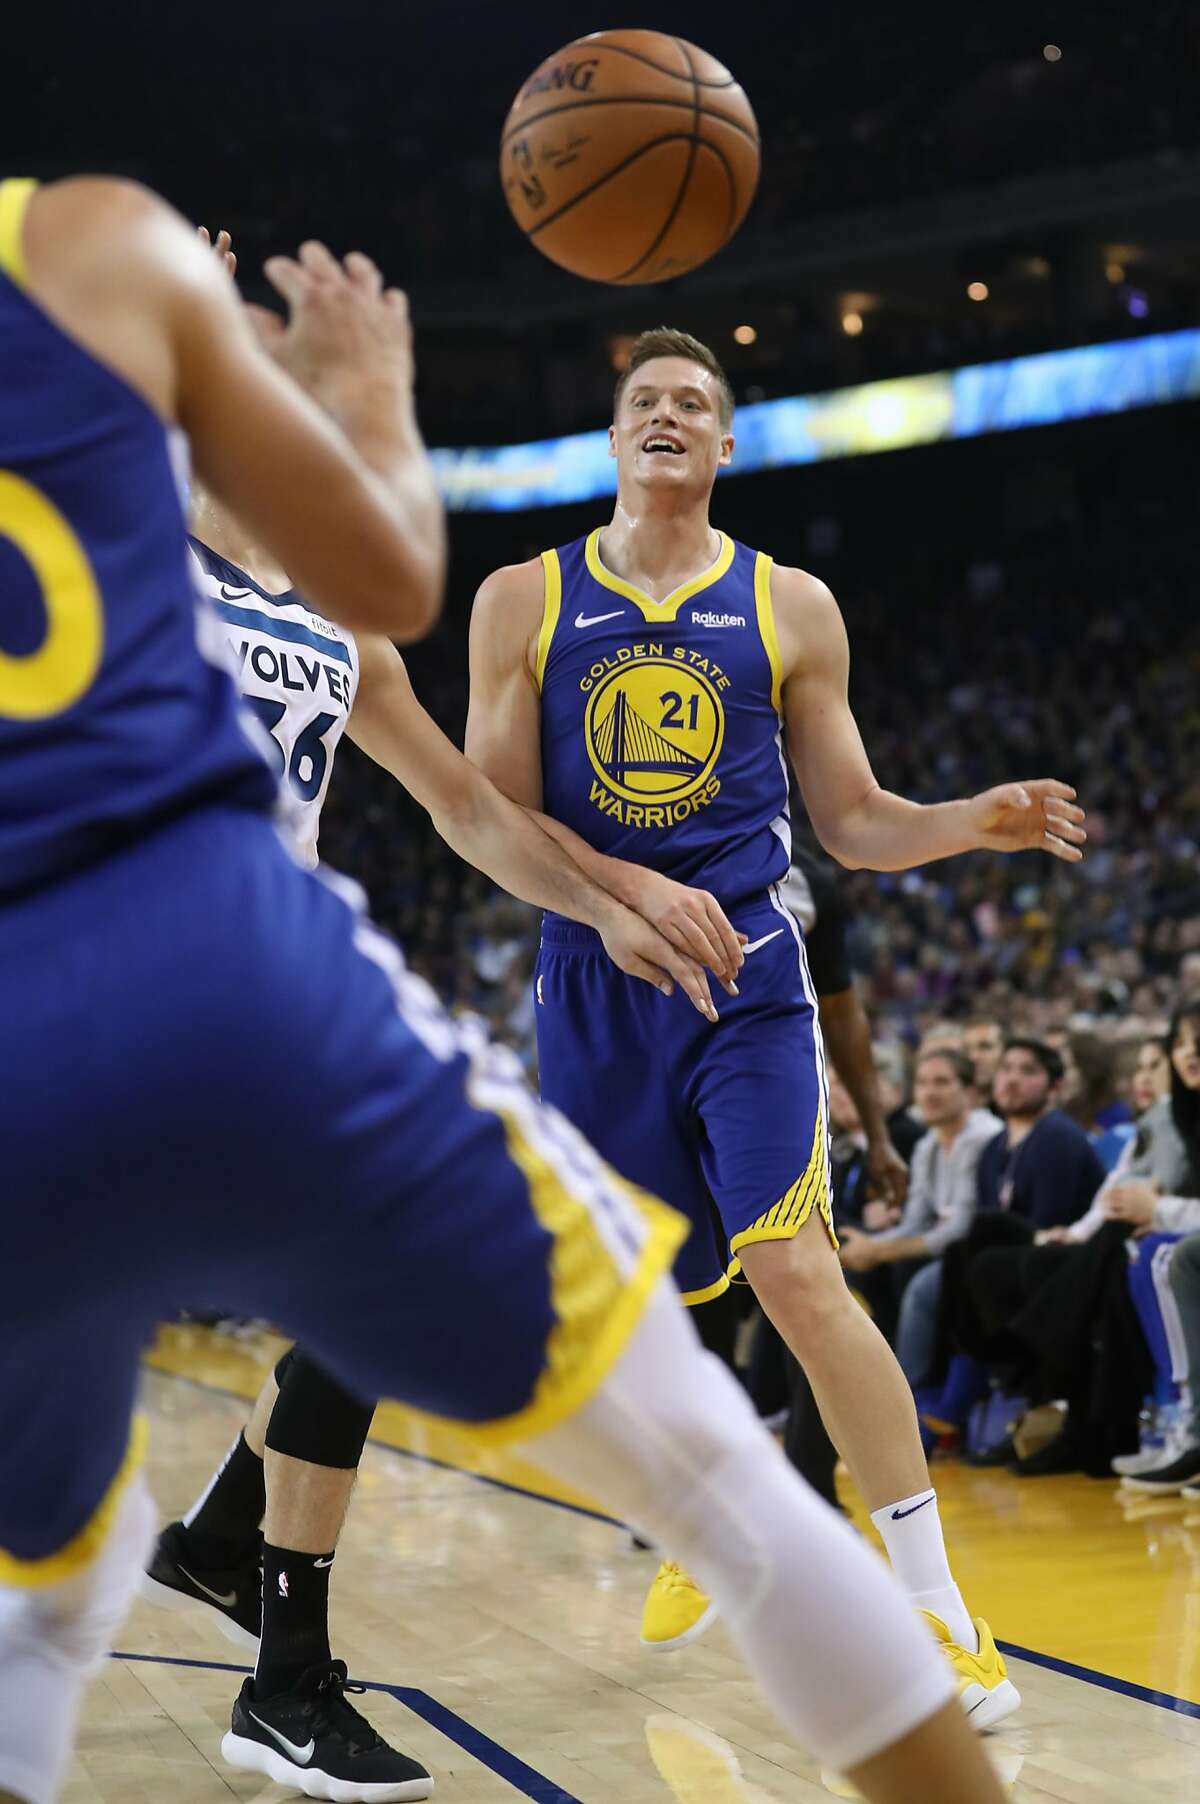 Golden State Warriors' Jonas Jerebko passes during 116-108 win over Minnesota Timberwolves in NBA game at Oracle Arena in Oakland, Calif. on Monday, December 10, 2018.